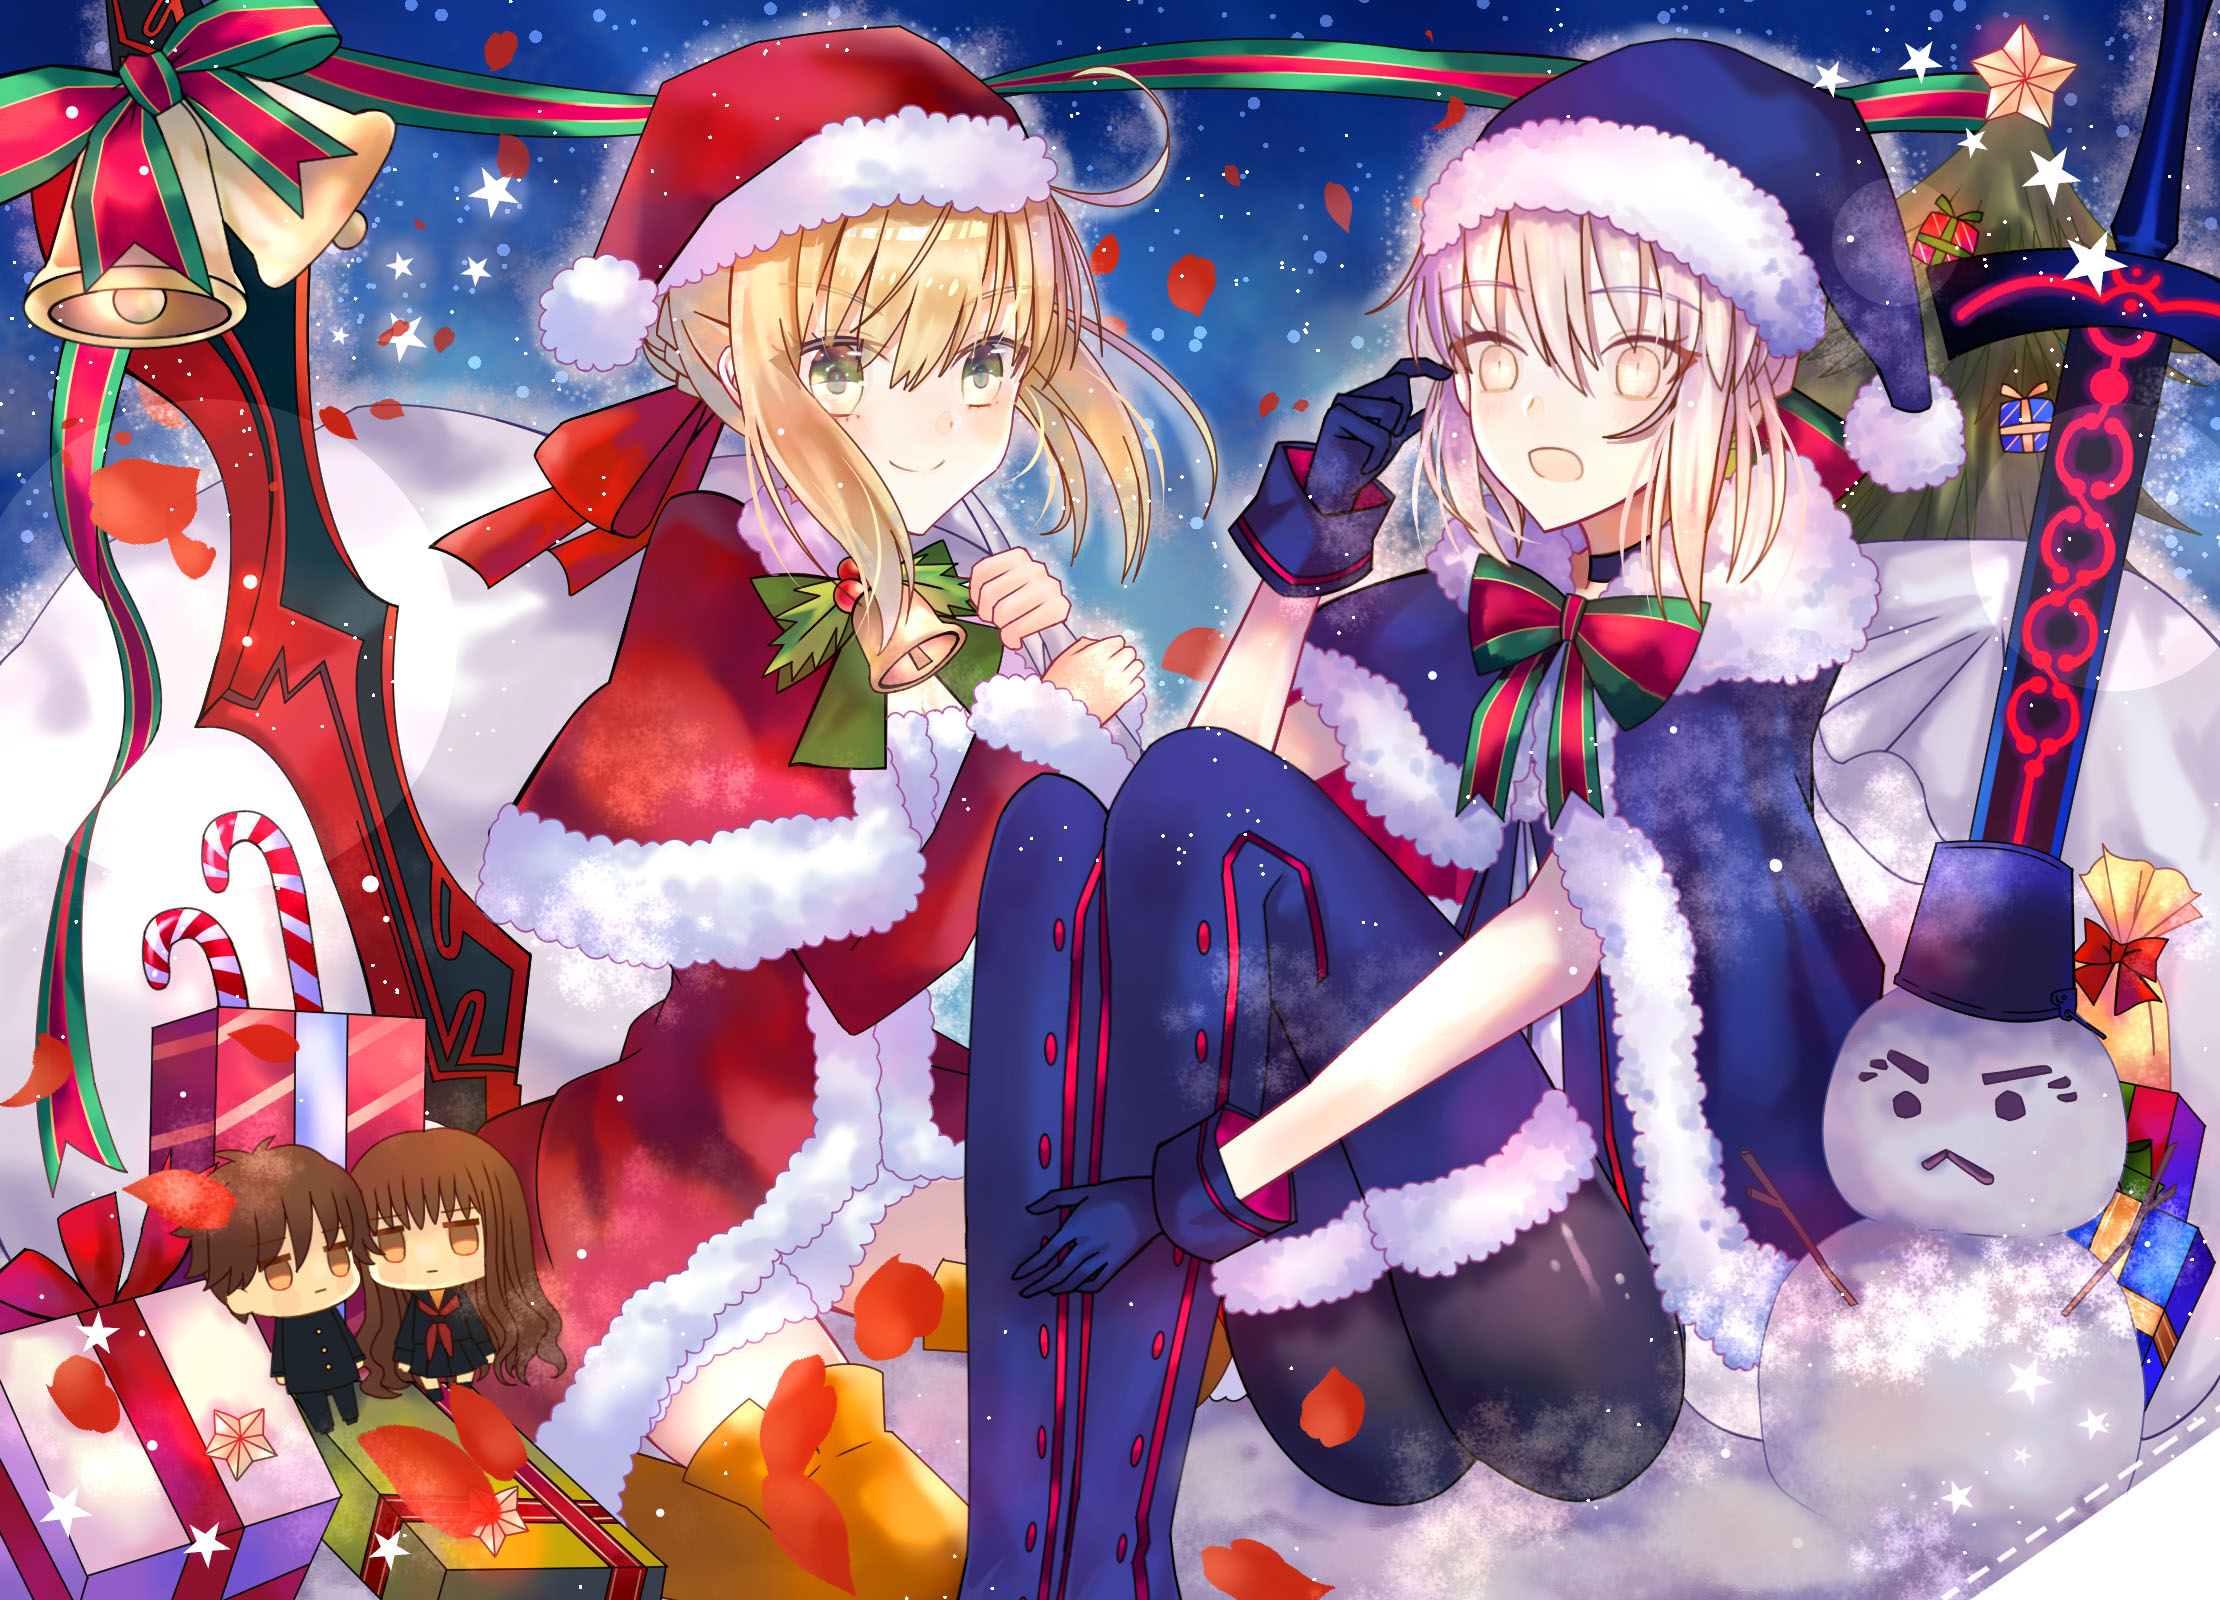 Anime 2220x1600 anime anime girls Fate series Fate/Grand Order Fate/Stay Night fate/stay night: heaven's feel Fate/Extra Fate/Extra CCC Santa hats Christmas Christmas clothes christmas dress Artoria Pendragon Saber Alter Nero Claudius artwork digital art fan art